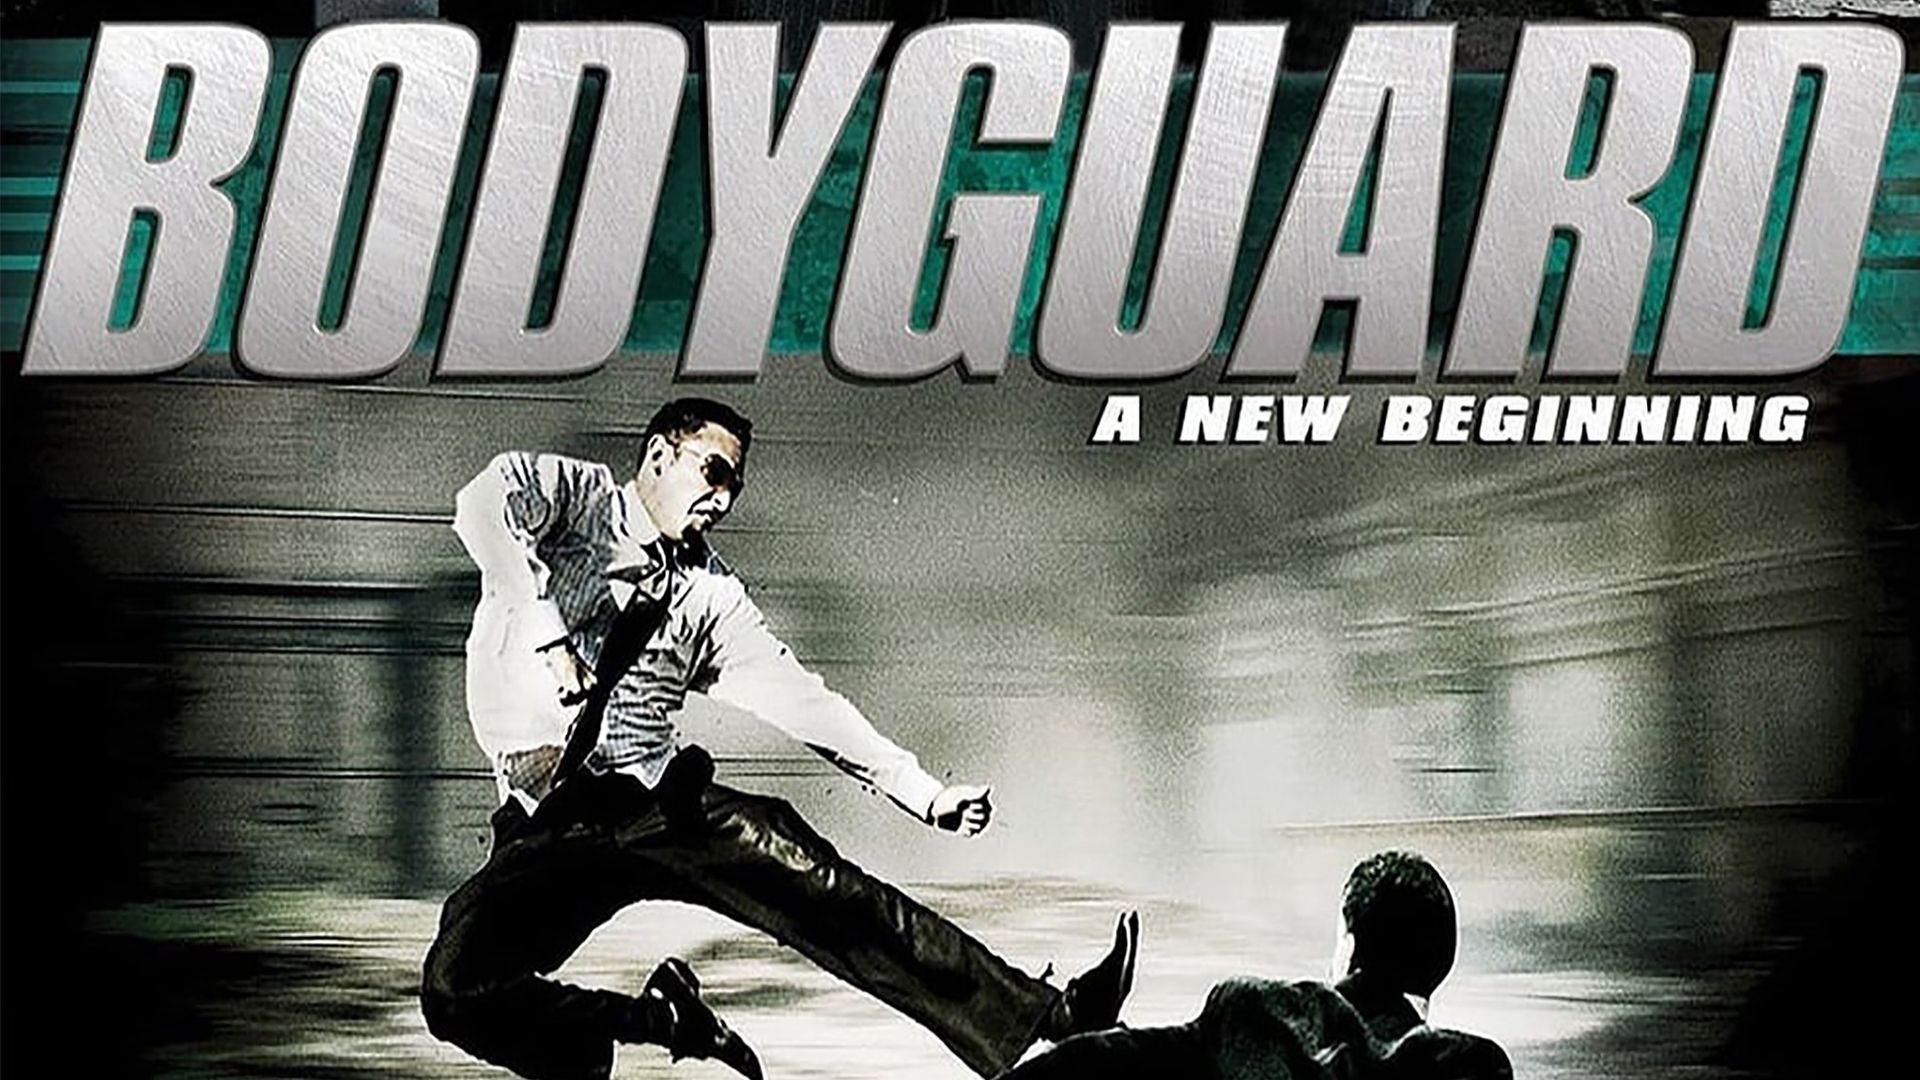 The Bodyguard (2004) British dvd movie cover